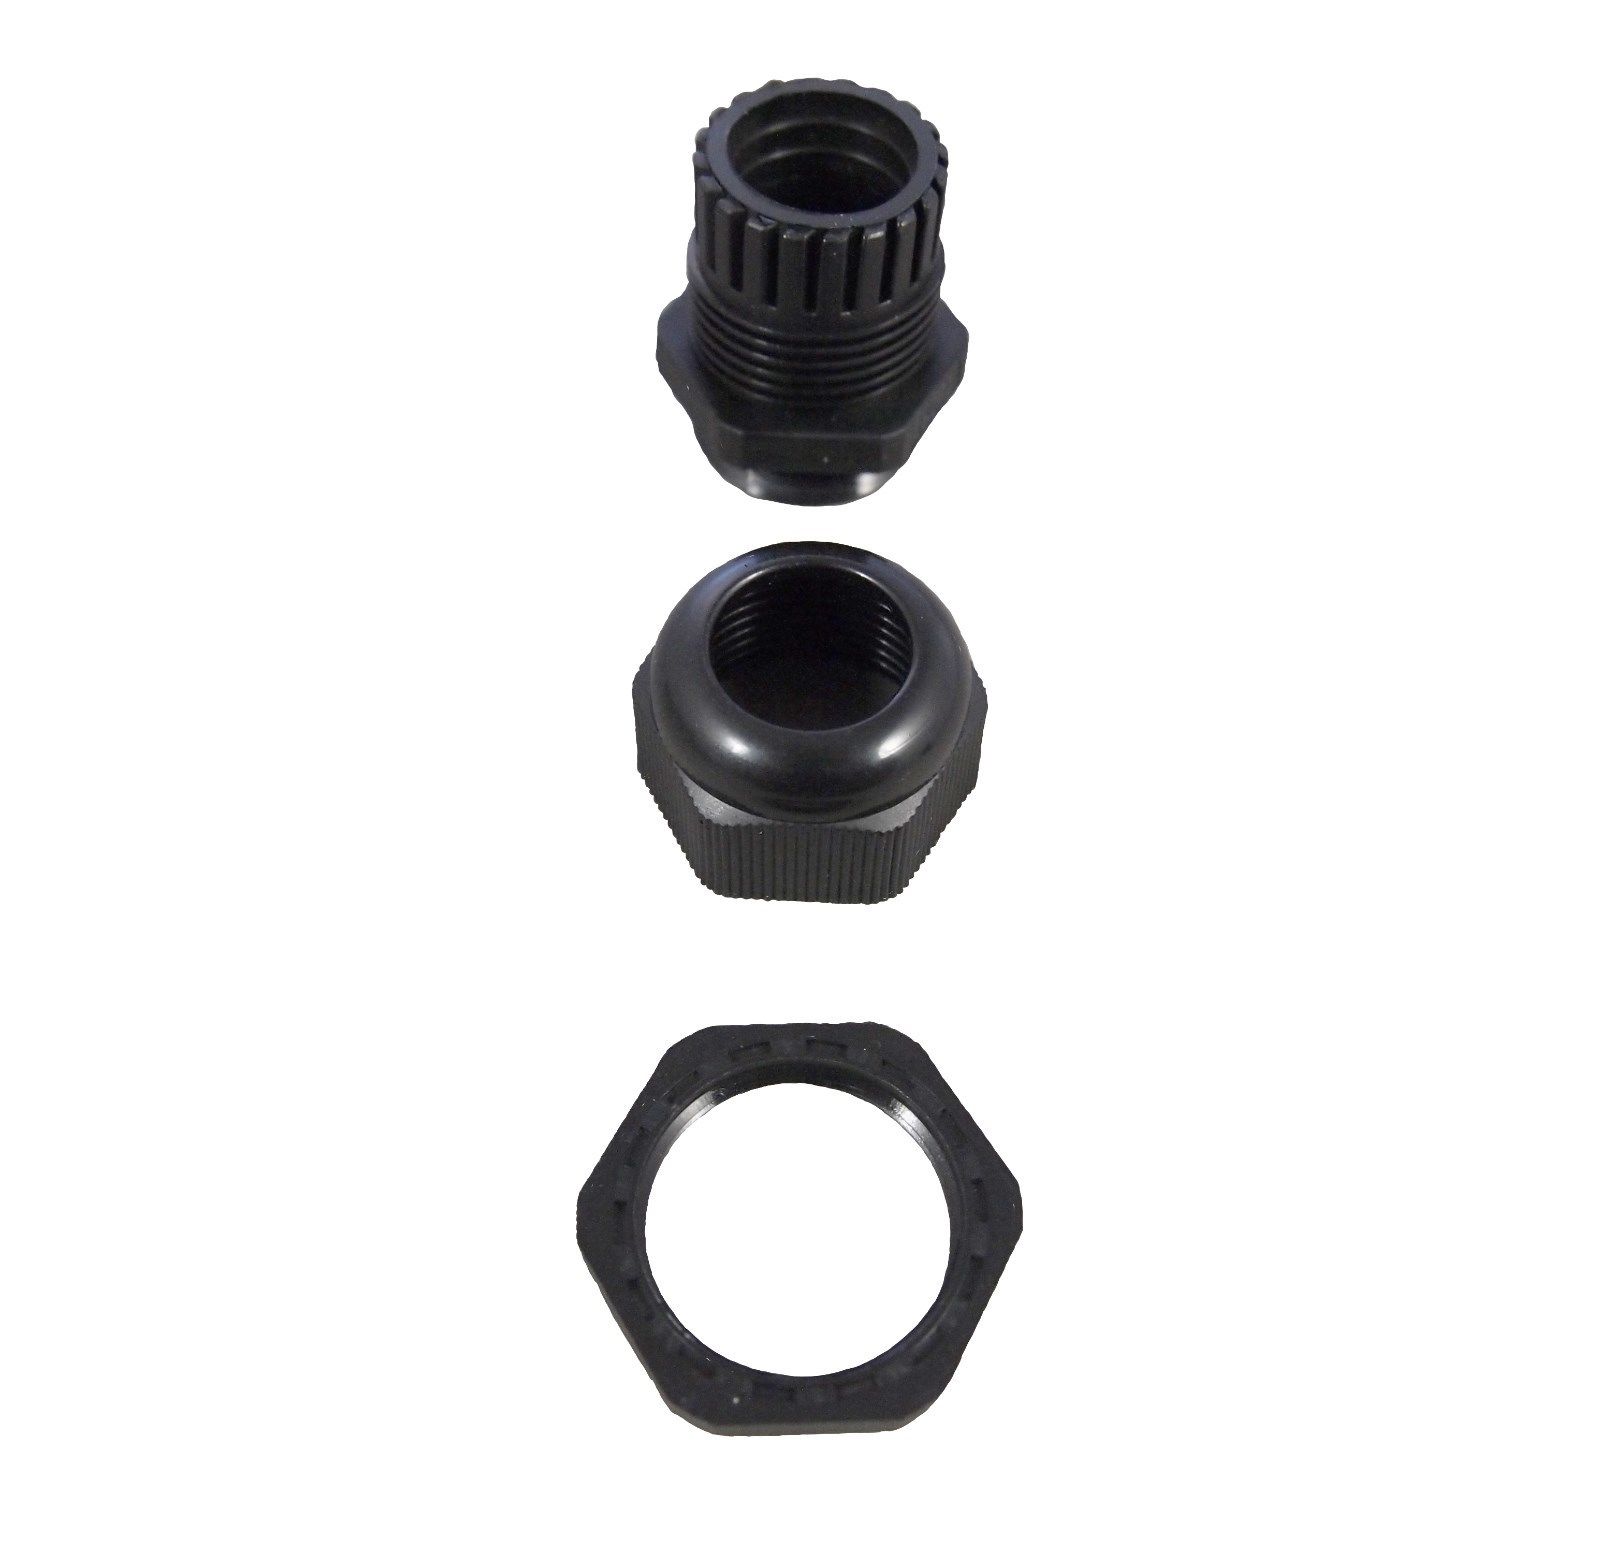 3/4" NPT Black Nylon Cable Glands WIth Gasket and Lock-Nut 100 Pack - image 2 of 2